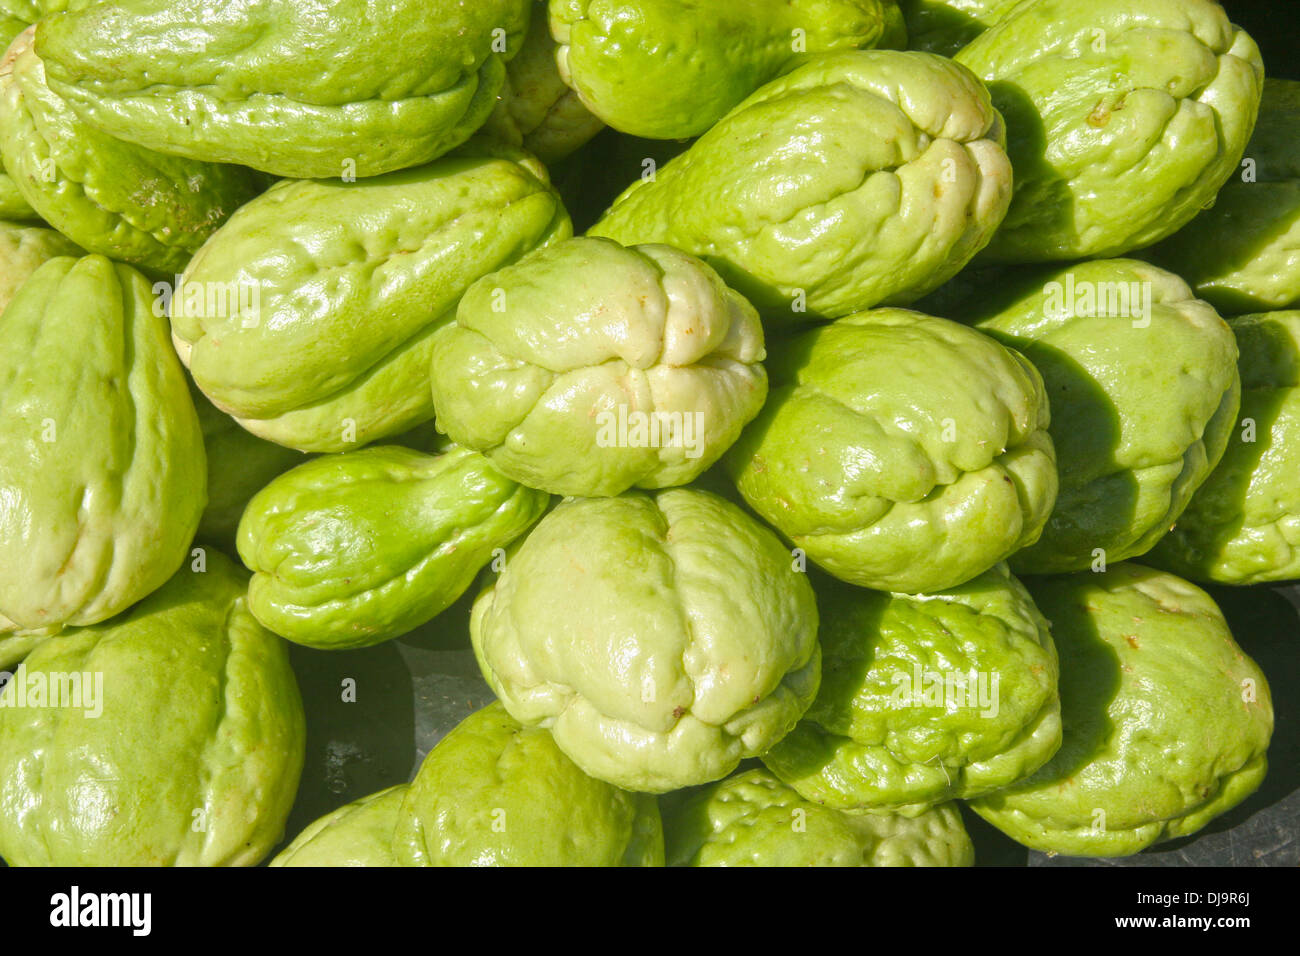 Green pile of Chayote fruit. Edible fruit originally for Central America. Stock Photo